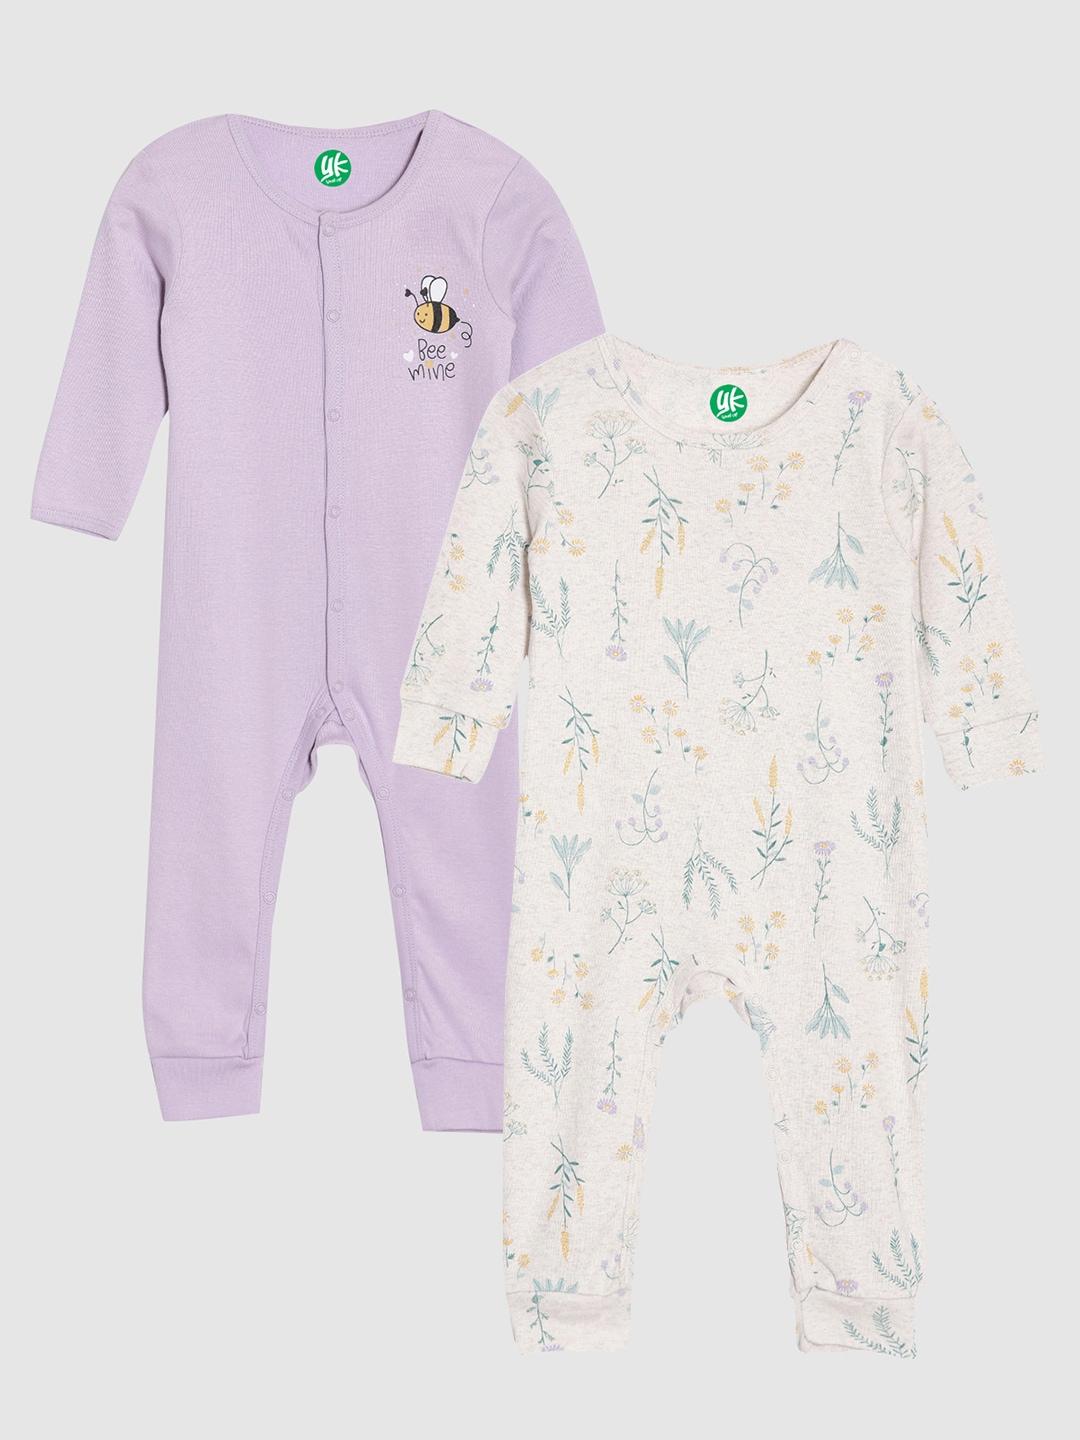 yk-organic-infant-girls-pack-of-2-lavender-&-off-white-printed-pure-organic-cotton-rompers